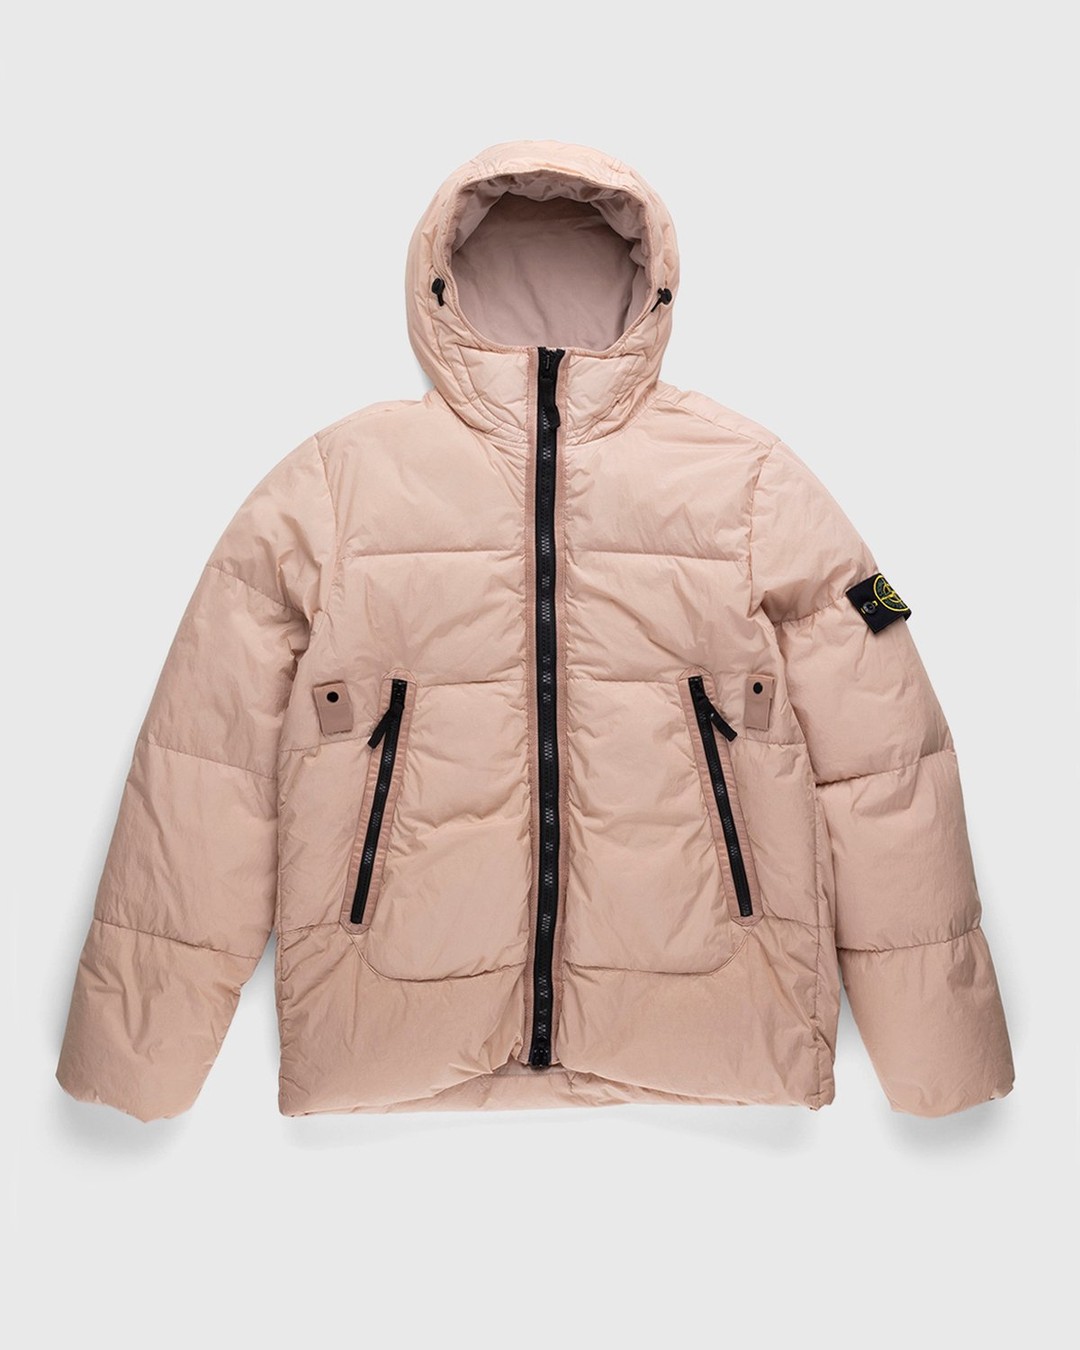 Stone Island – Real Down Jacket Rustic Rose - Down Jackets - Pink - Image 1